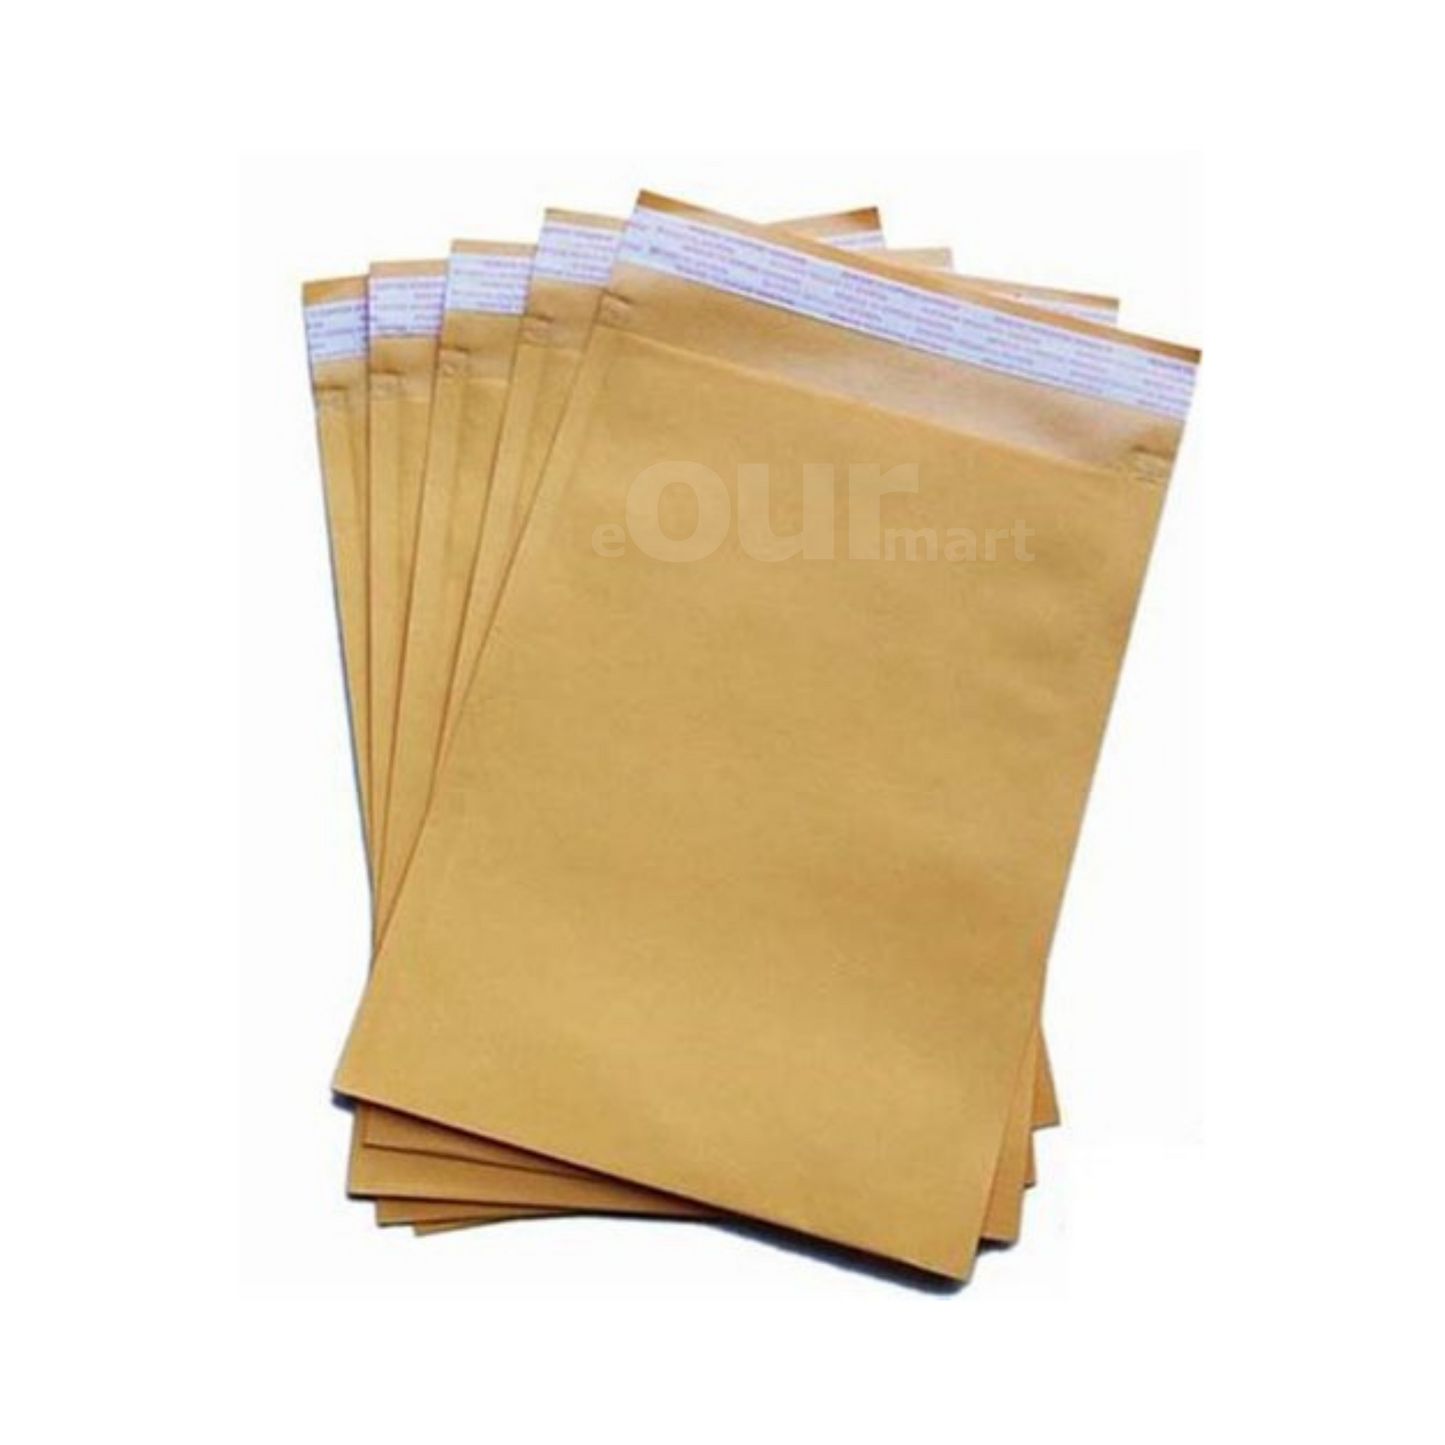 Paper Courier Bags, 6x8 Inches, (PB-1, 100 Bags)